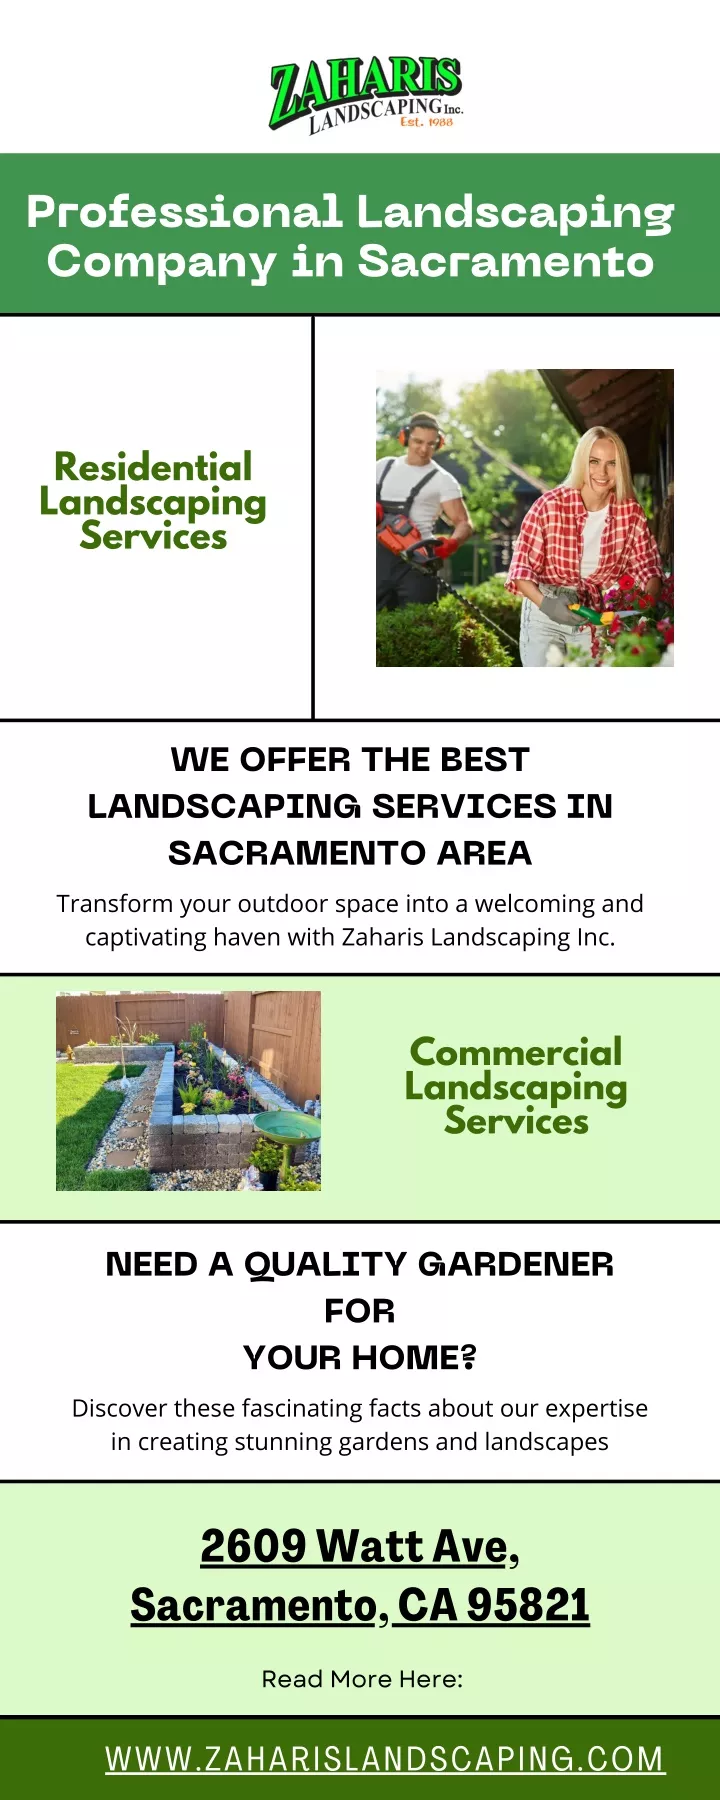 professional landscaping company in sacramento